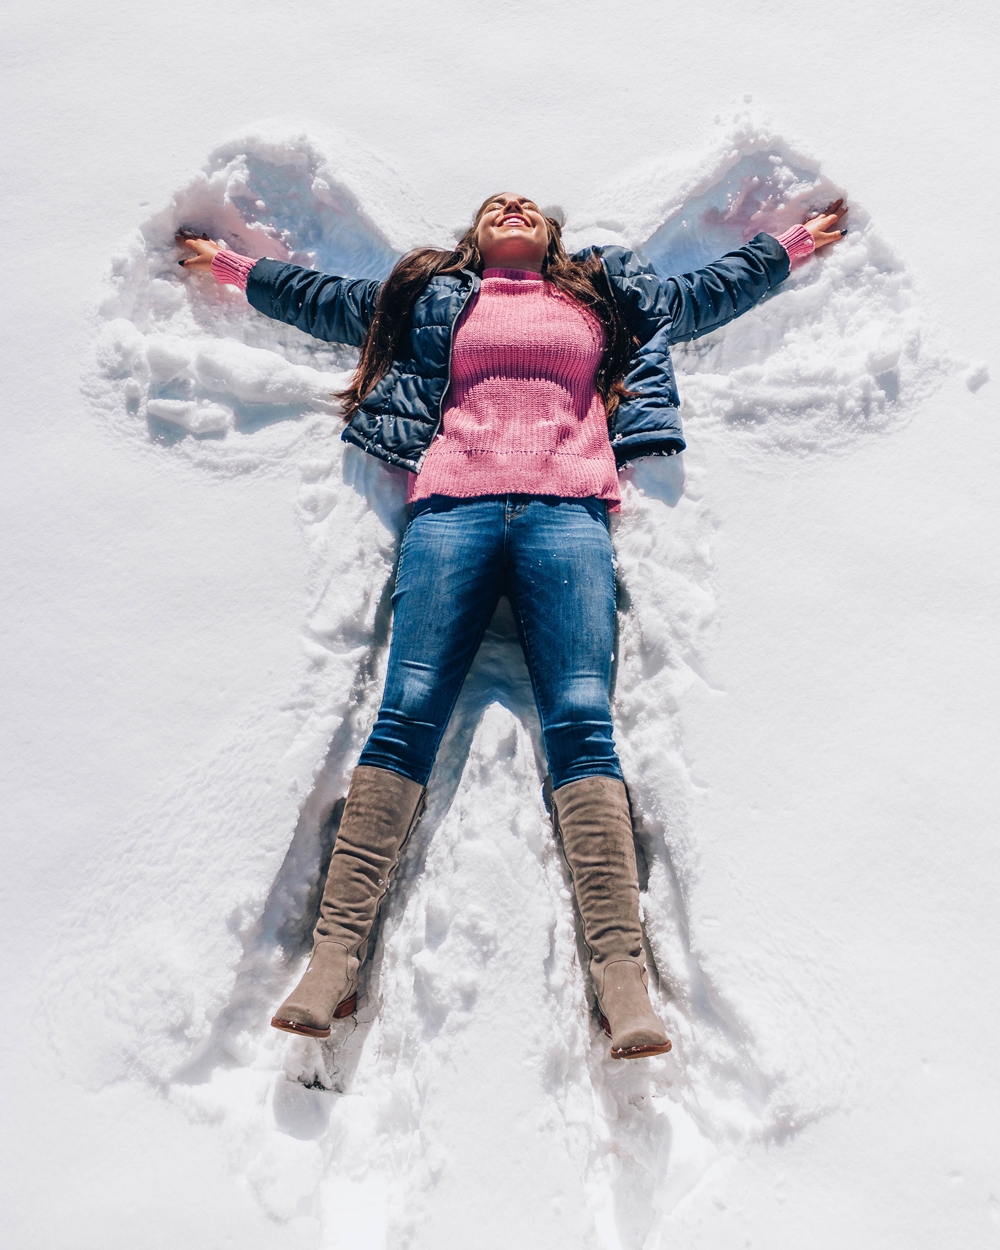 Lauryn Hock making a snow angel while wearing a winter outfit of tall boots, jeans, a sweater, and jacket